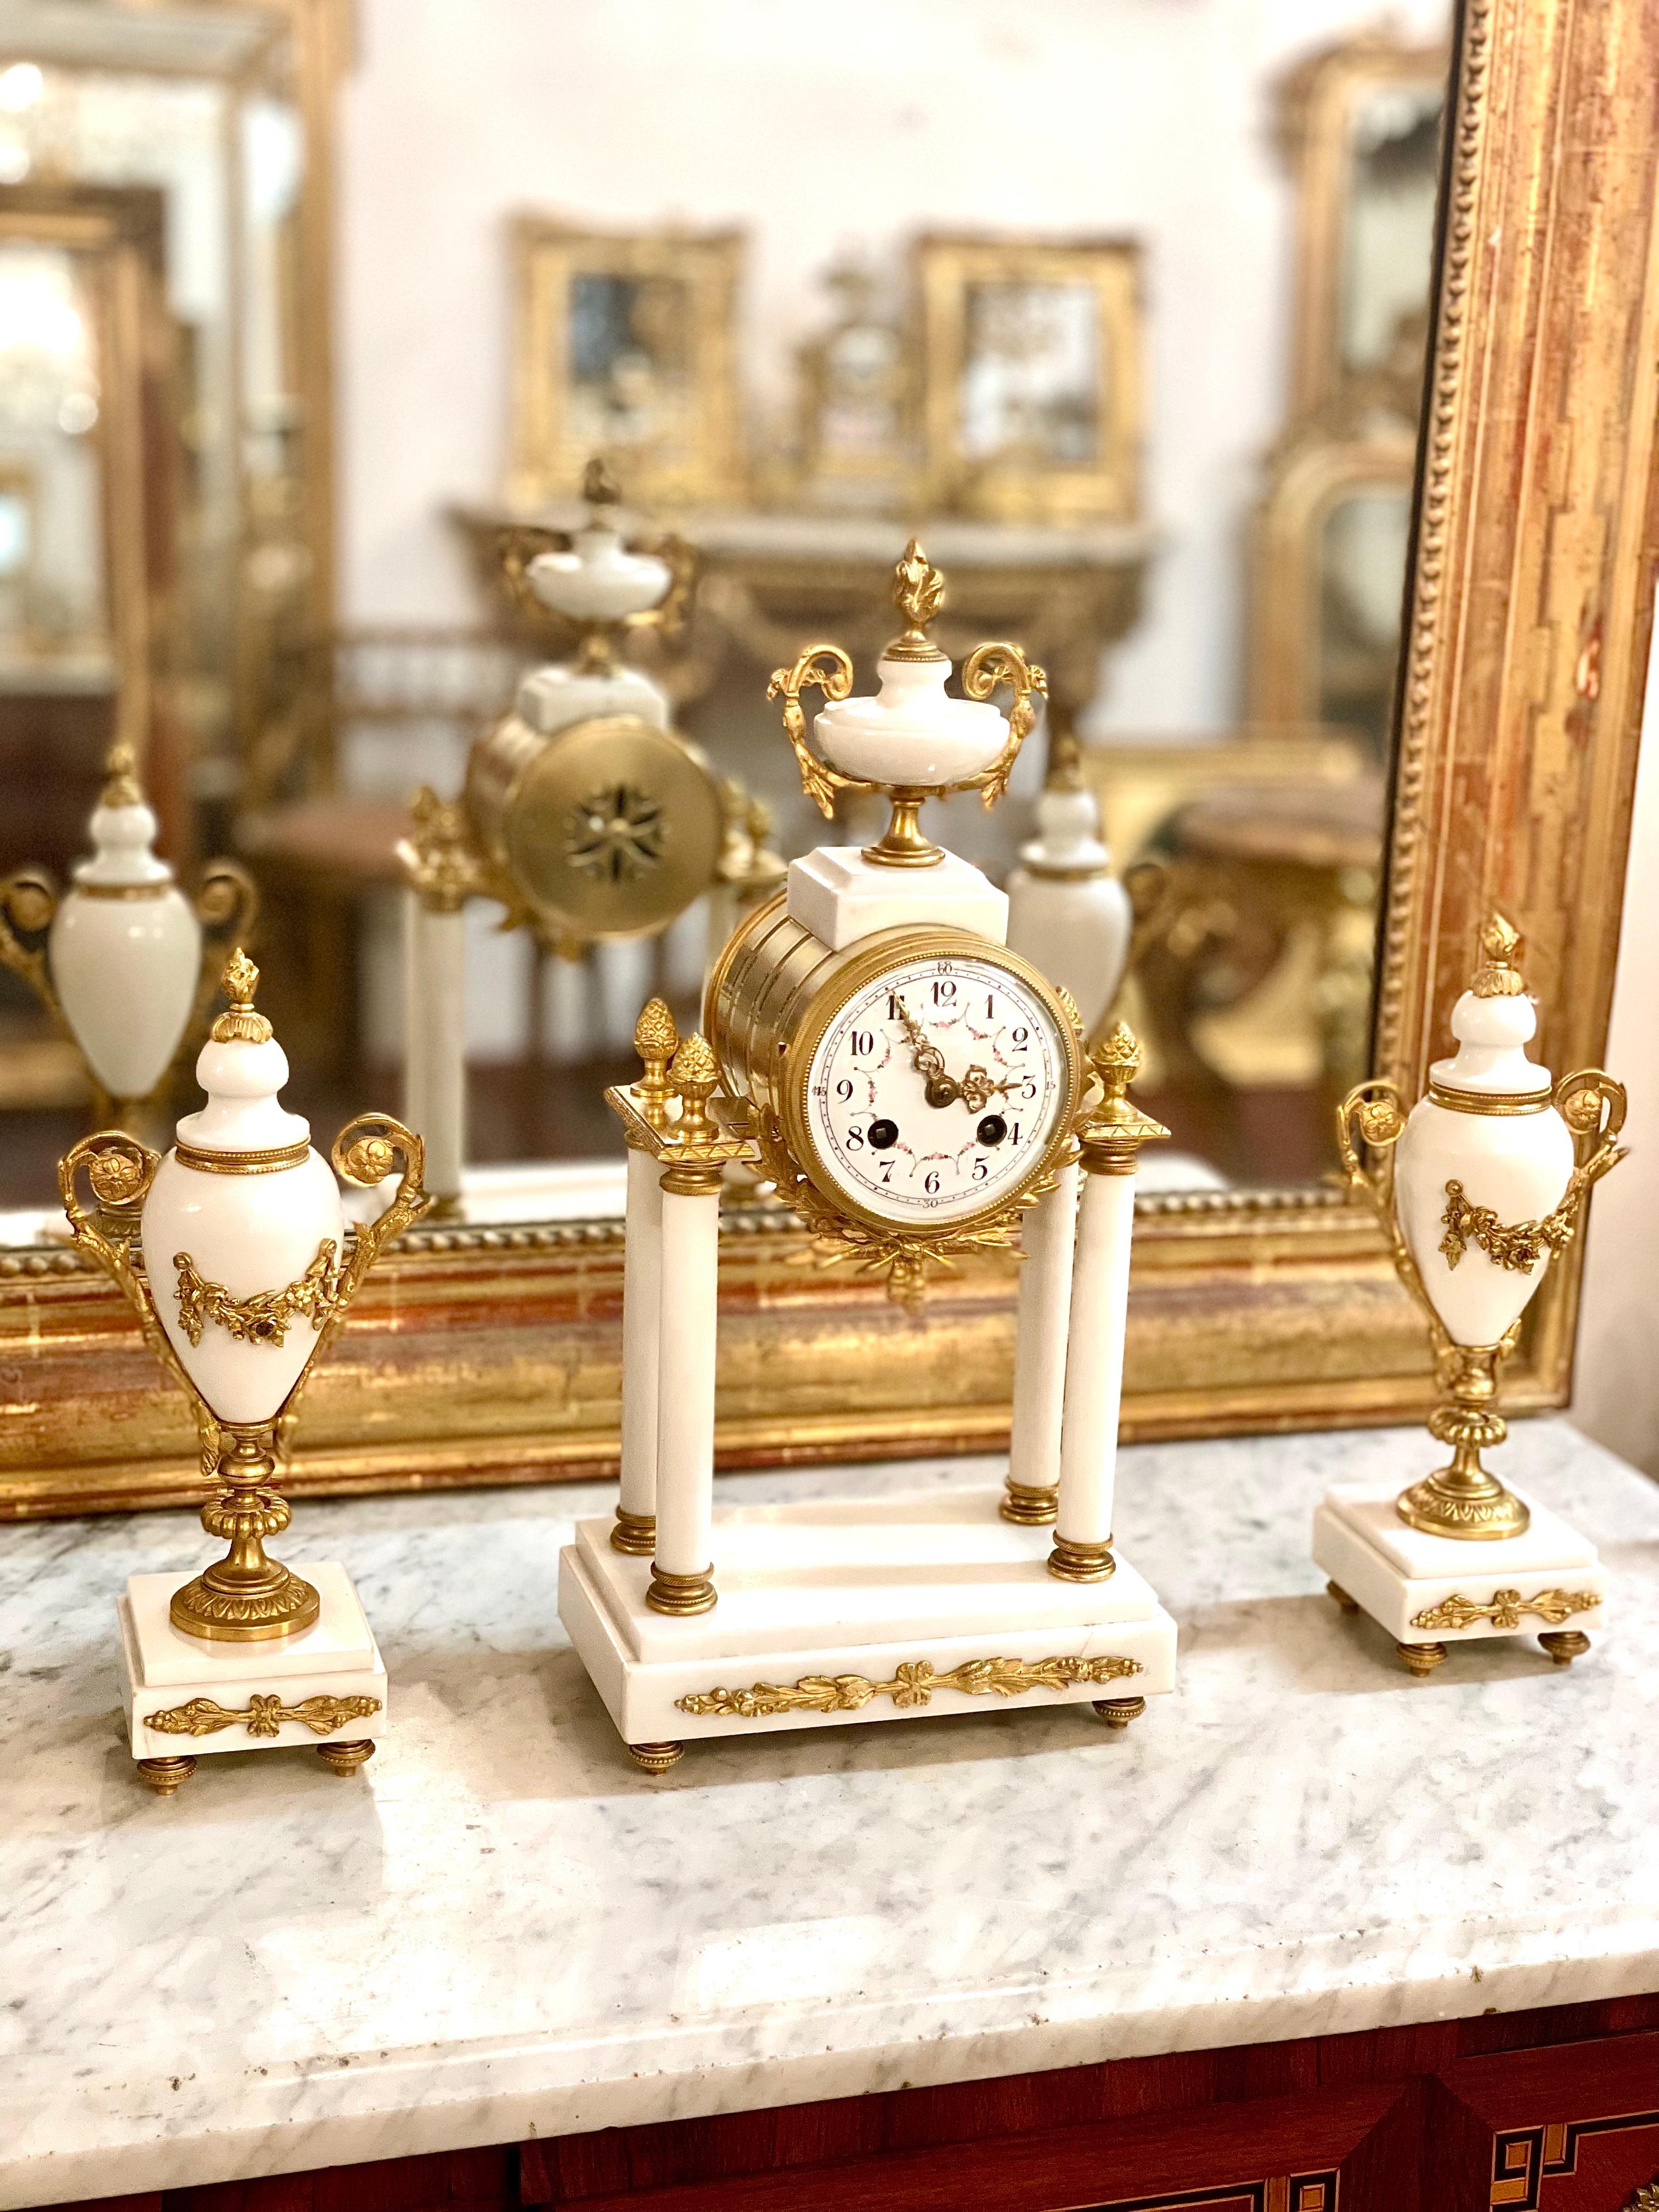 French White Marble and Ormolu Portico Mantle Clock For Sale